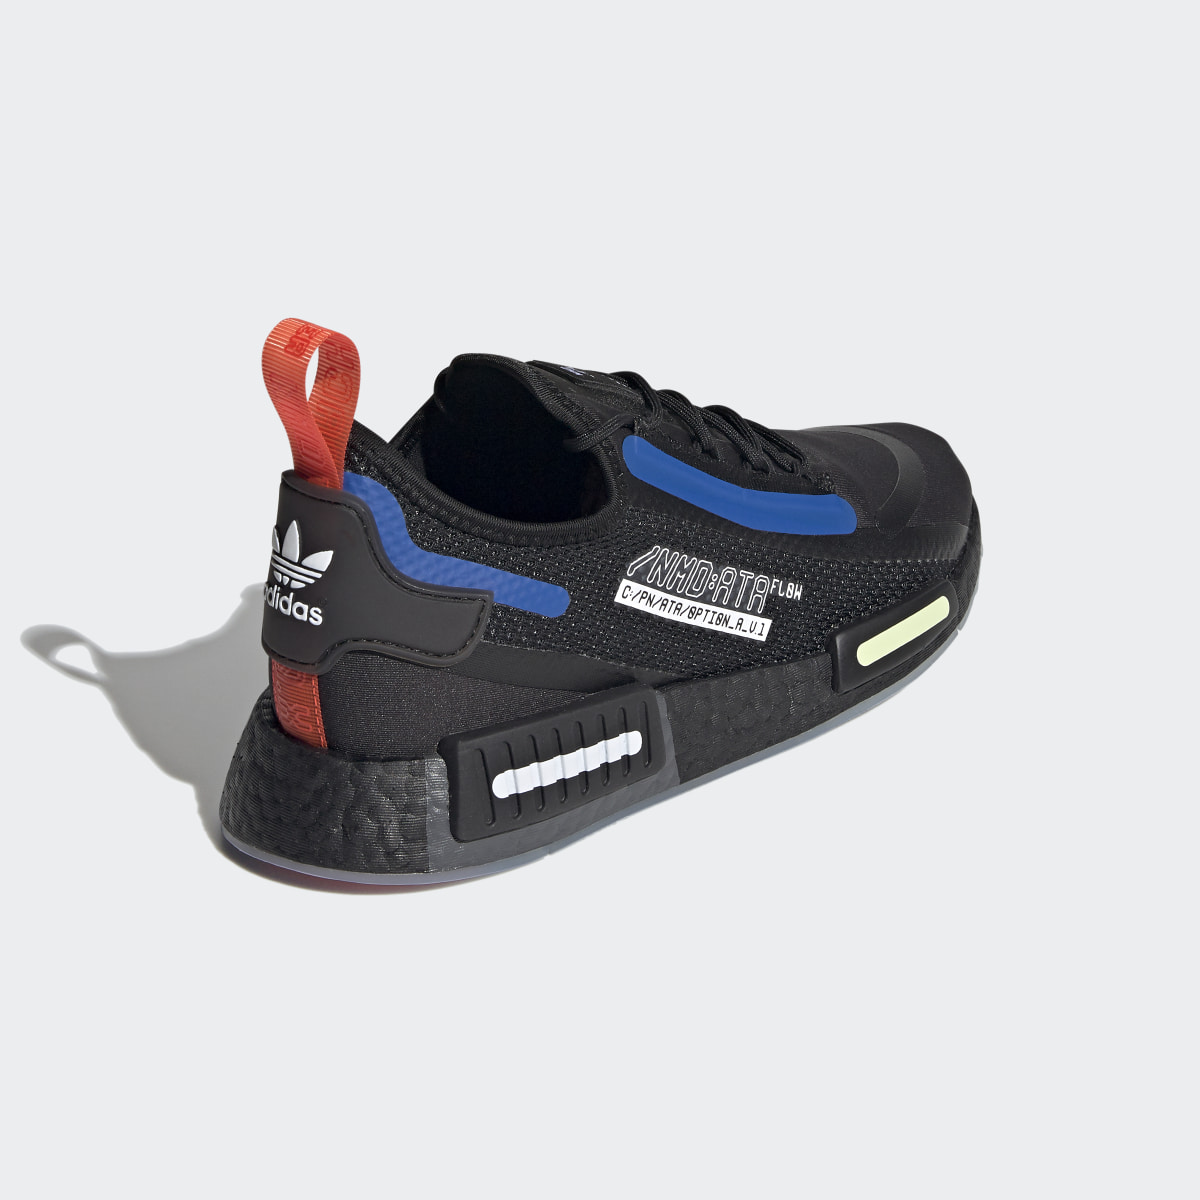 Adidas NMD_R1 SPECTOO SHOES. 7